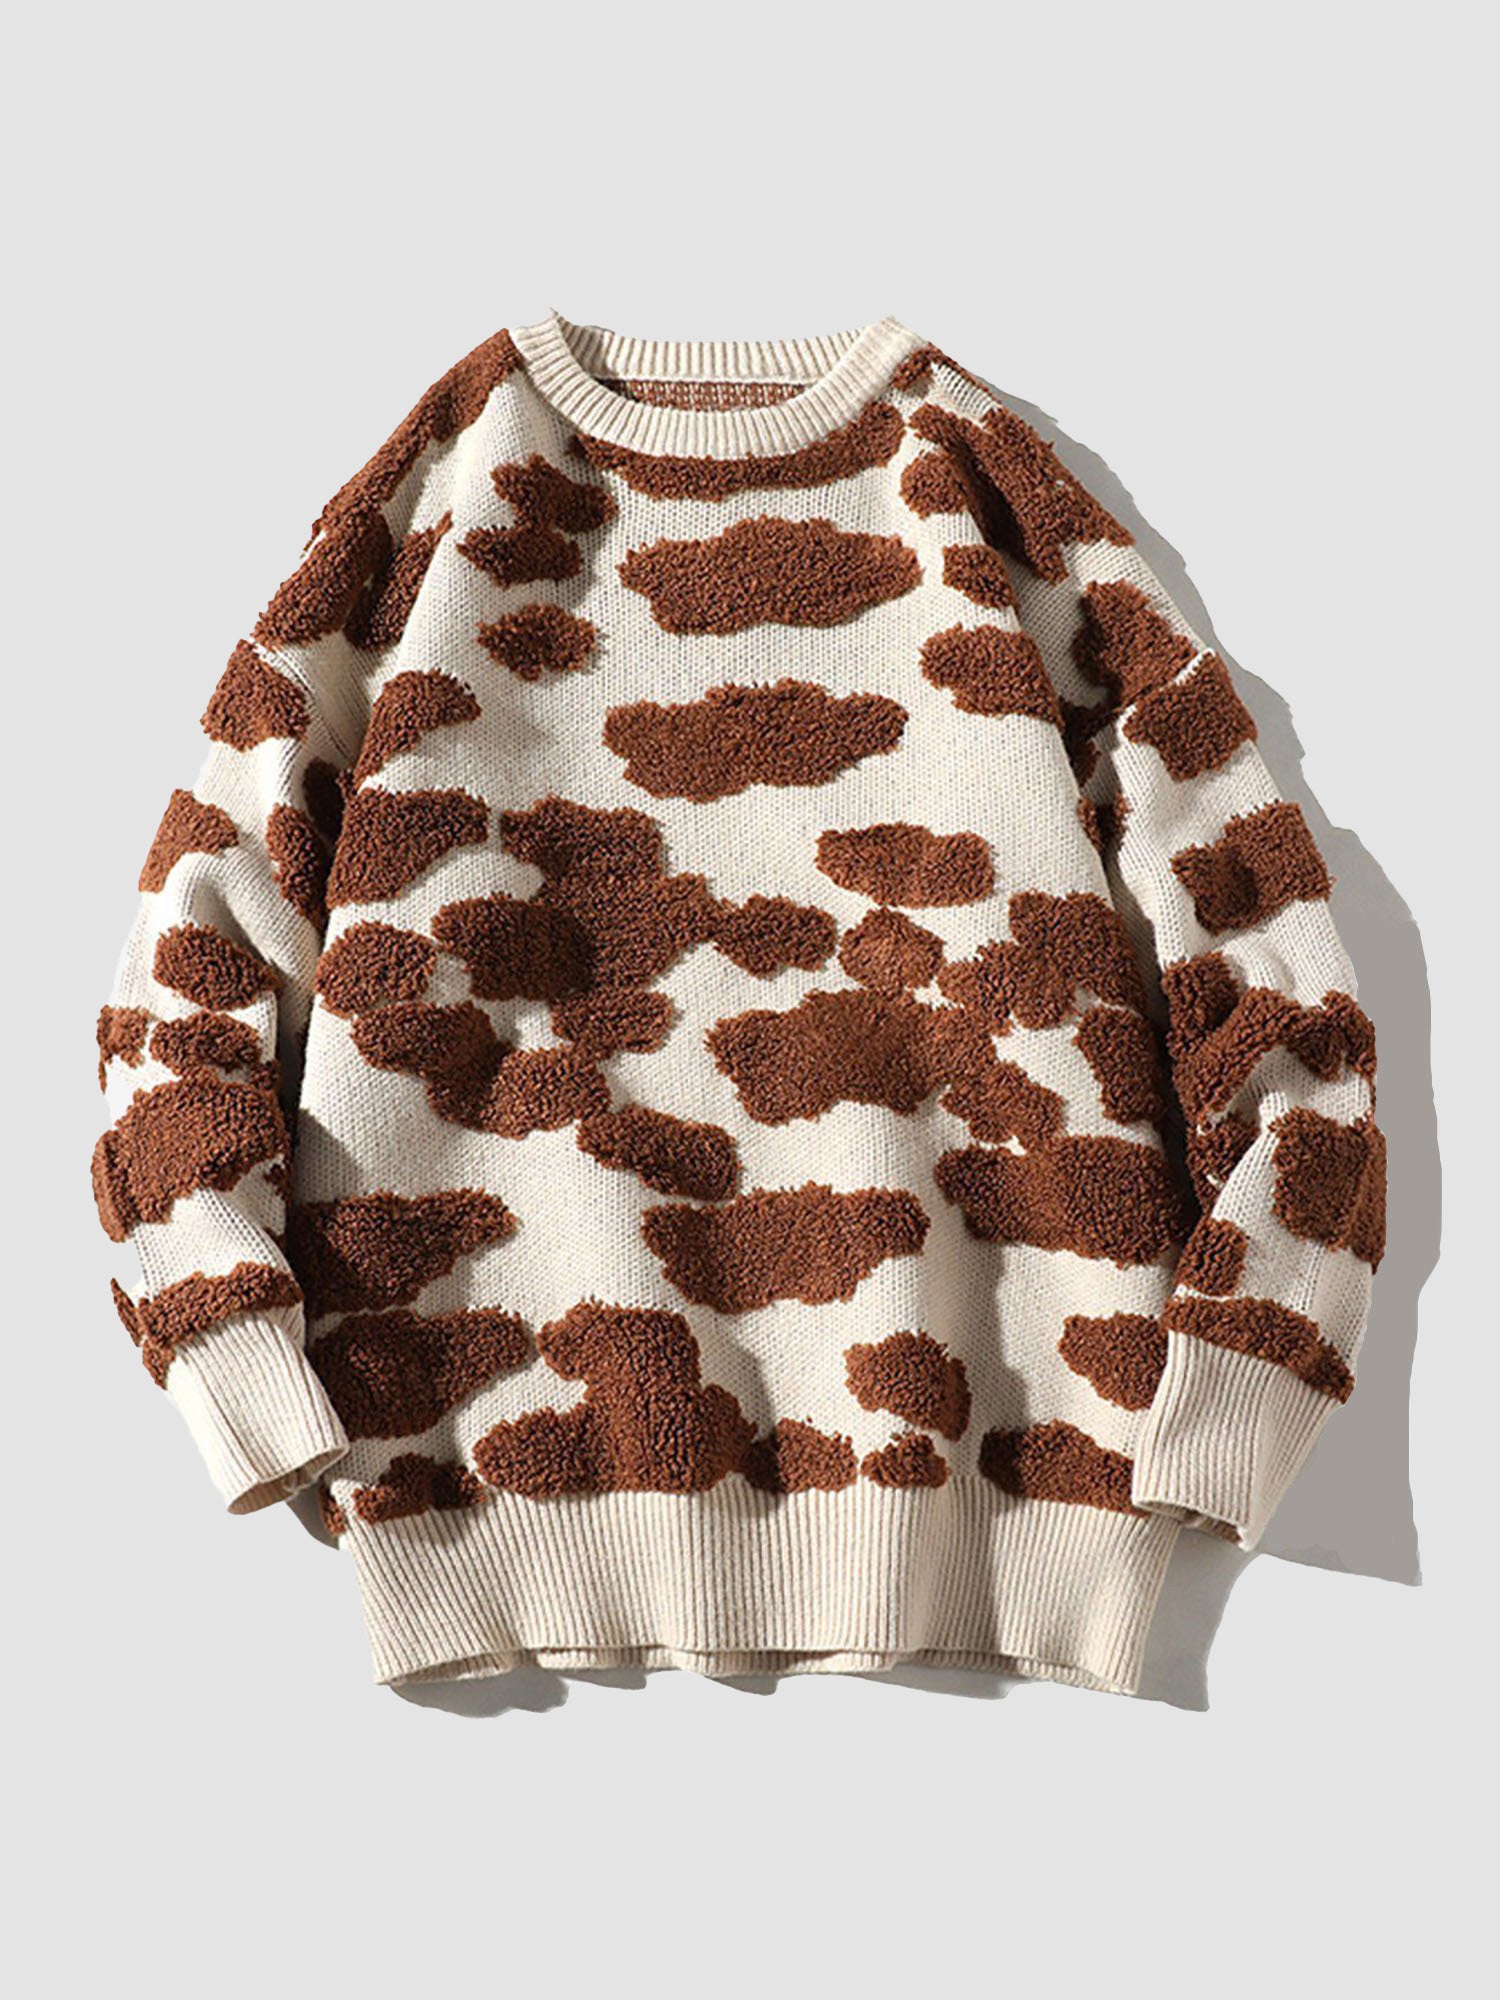 JUSTNOTAG Cloud Three-dimensional Relief Pattern Sweater